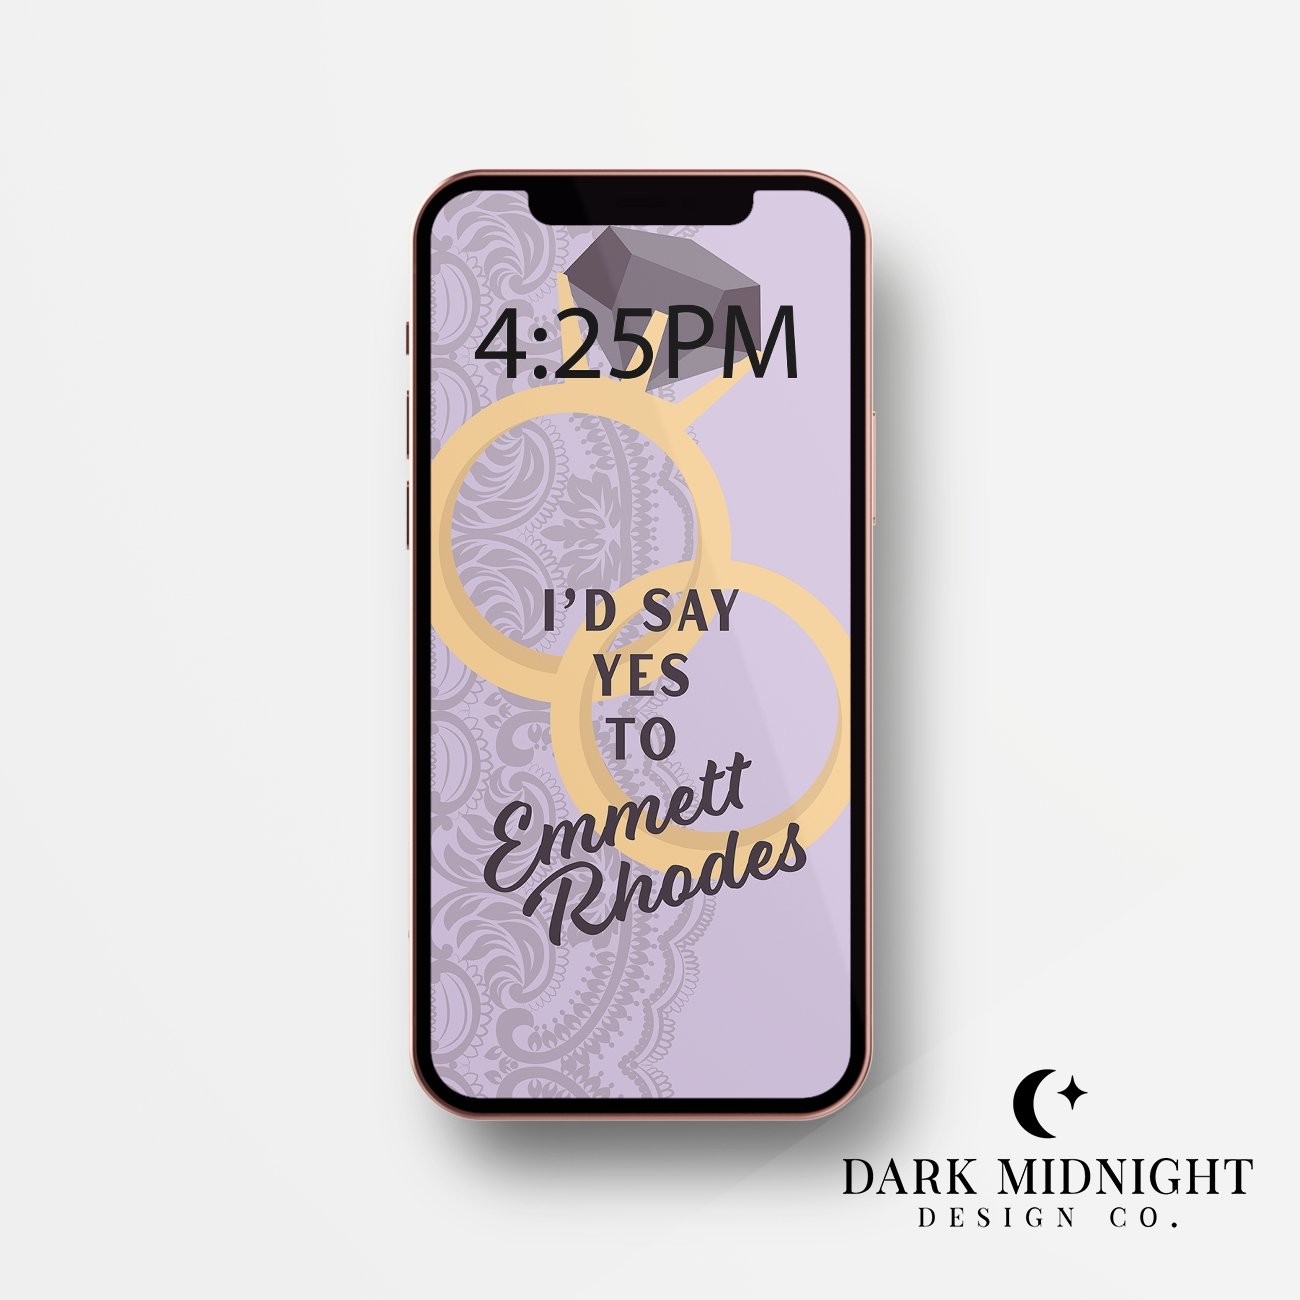 I'd Say Yes To Emmett Rhodes Phone Wallpaper - Officially Licensed Queen's Cove Series - Dark Midnight Design Co